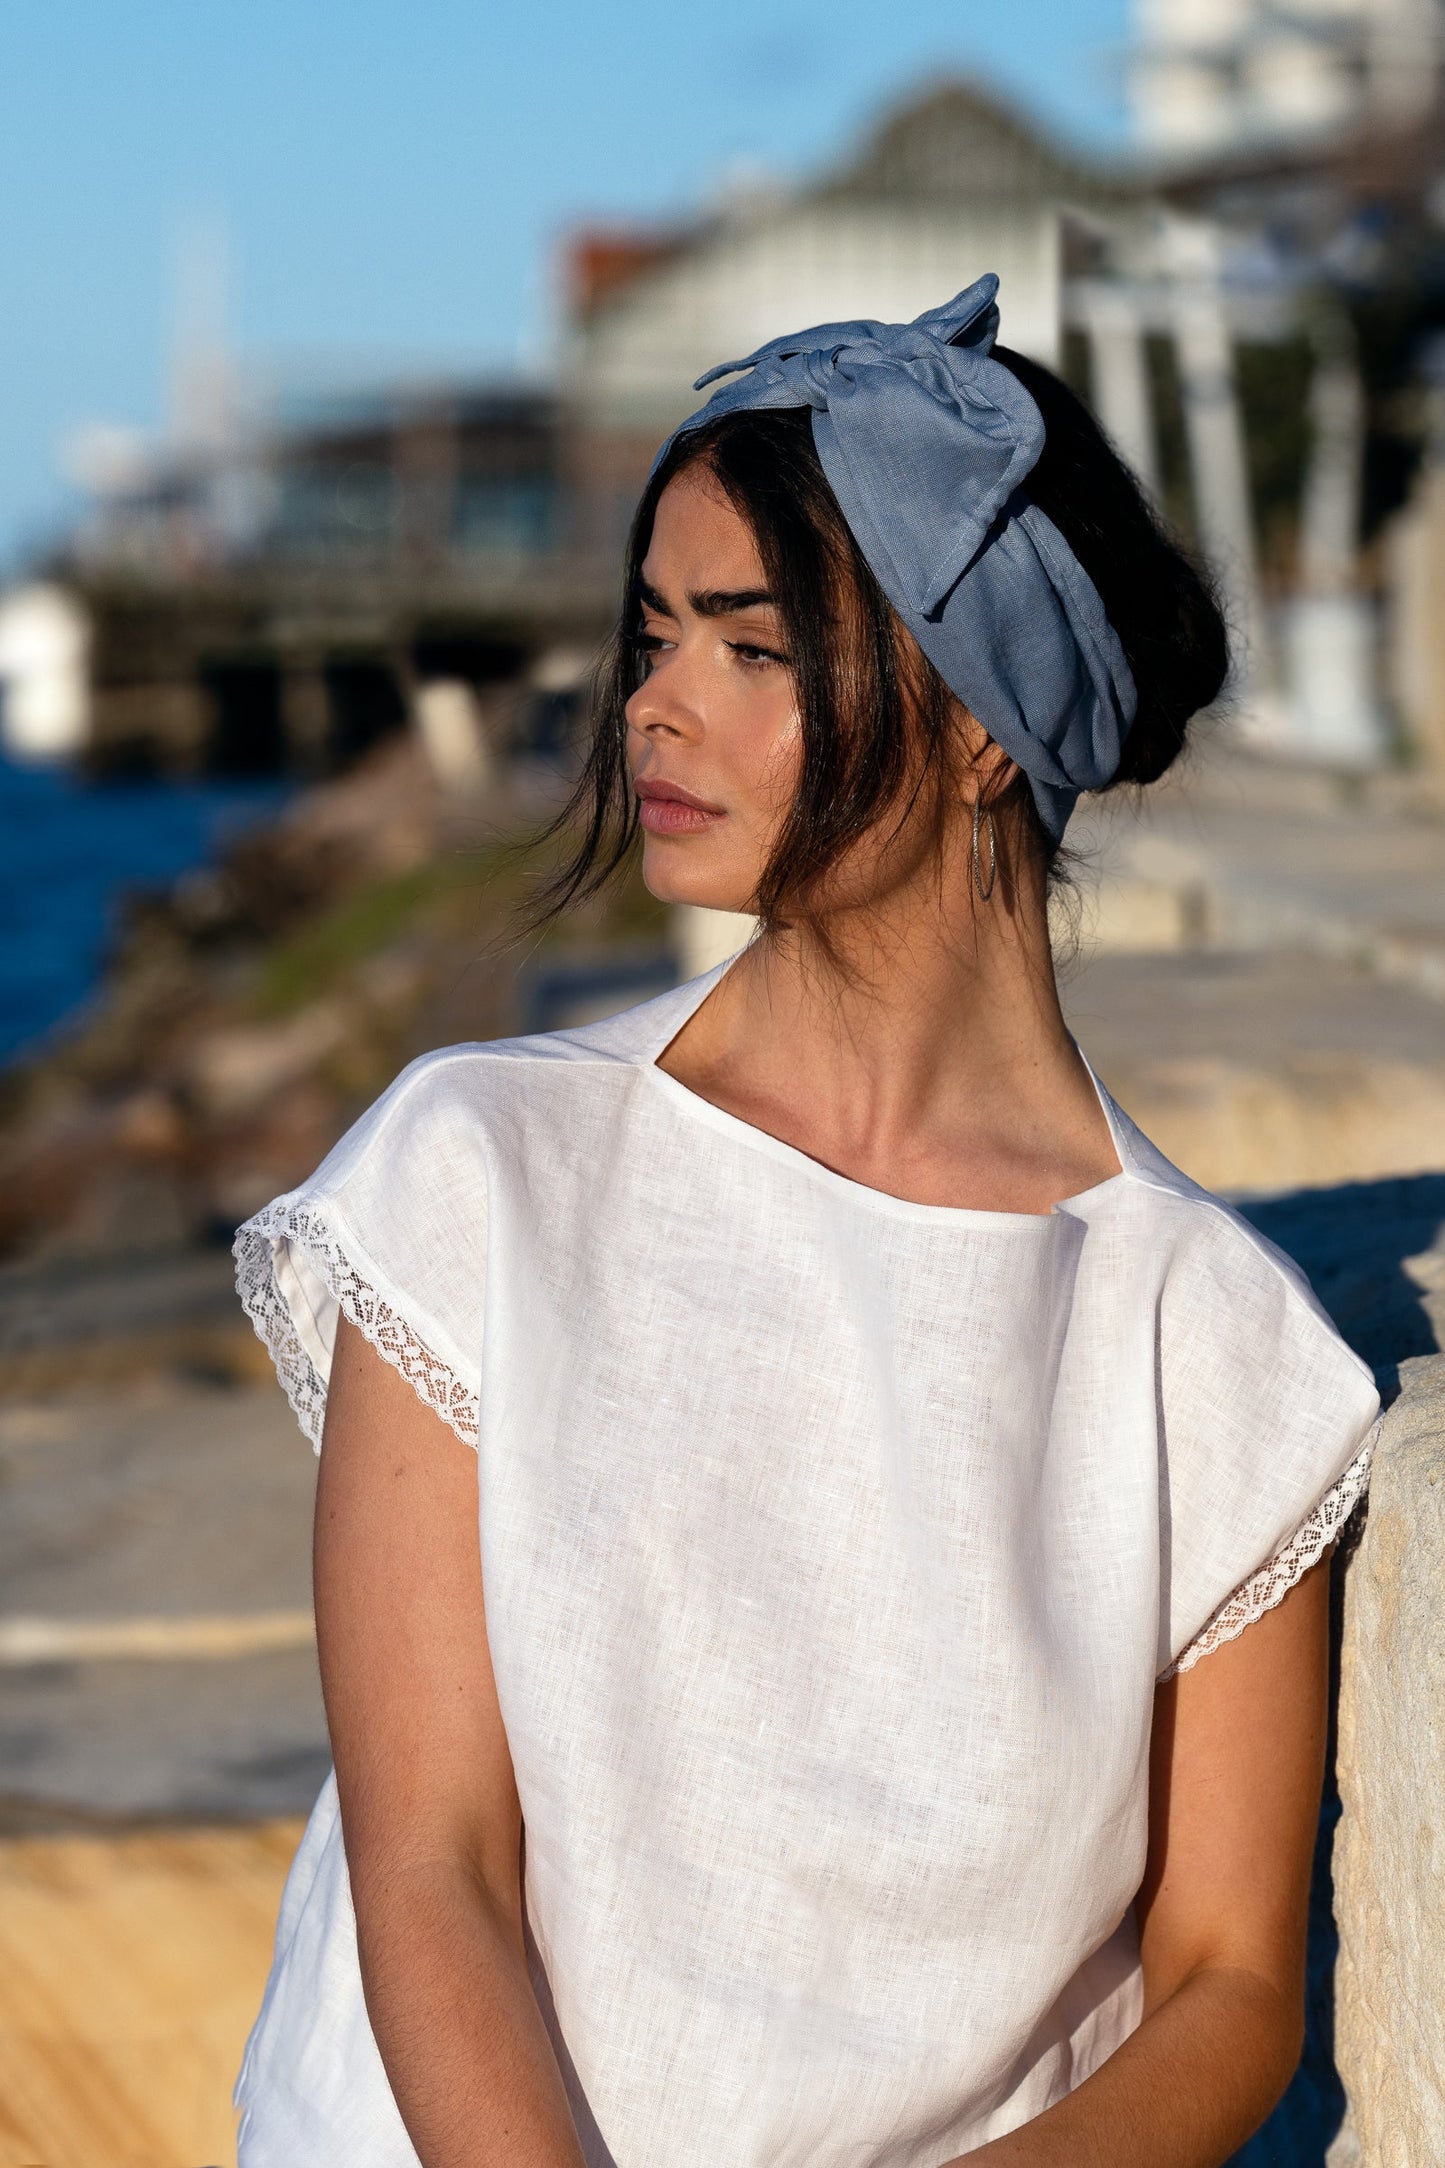 Zero Waste Headscarf - VOUS Contemporary Clothing